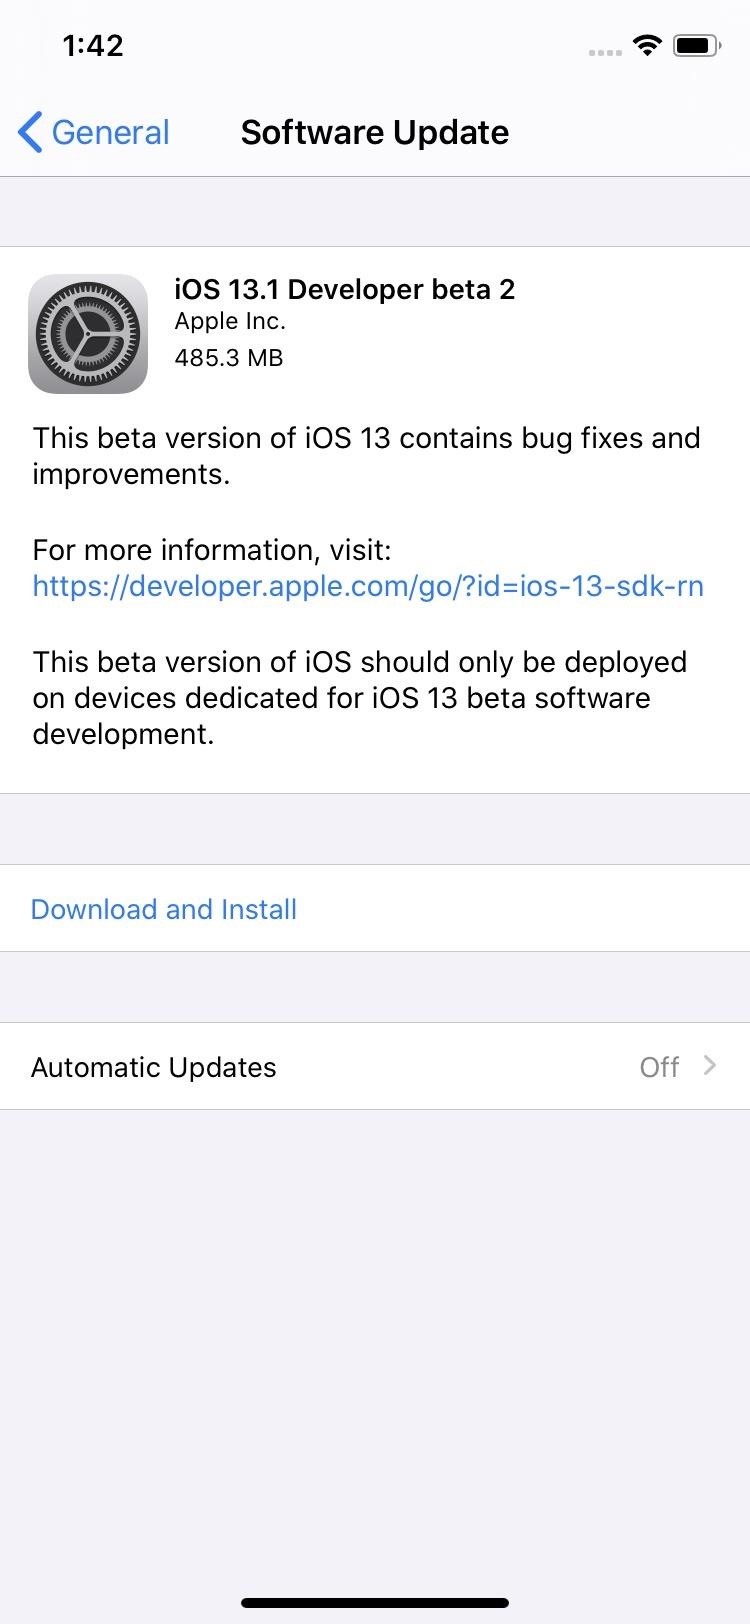 Apple Just Released the Second Developer Beta for iOS 13.1